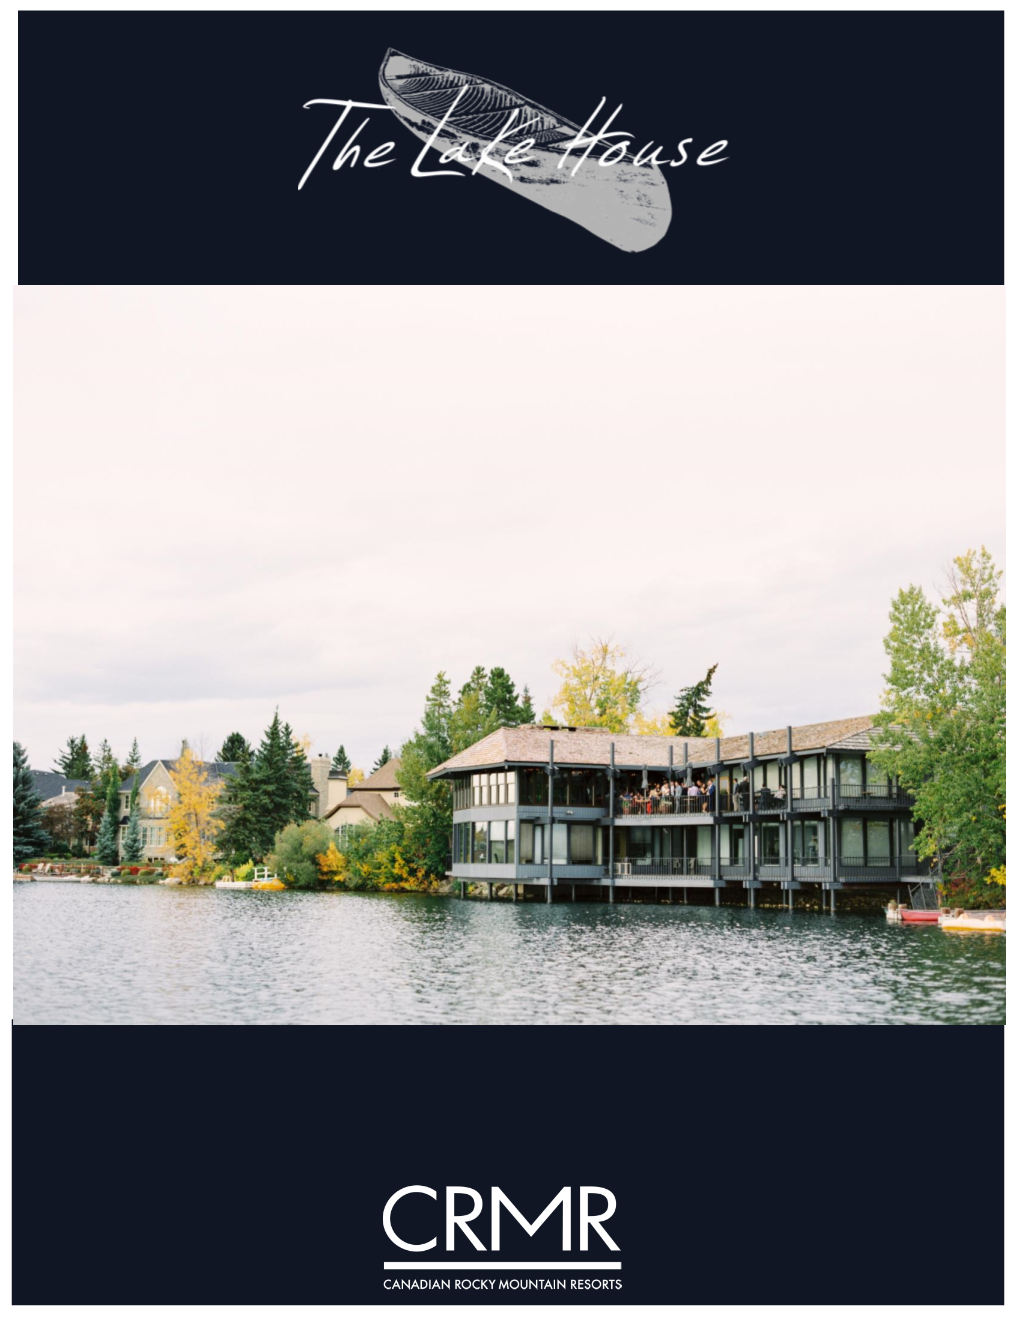 The Lake House Is Home to One of Calgary’S Finest and Most Creative Restaurants As Well As a Unique Setting for Weddings